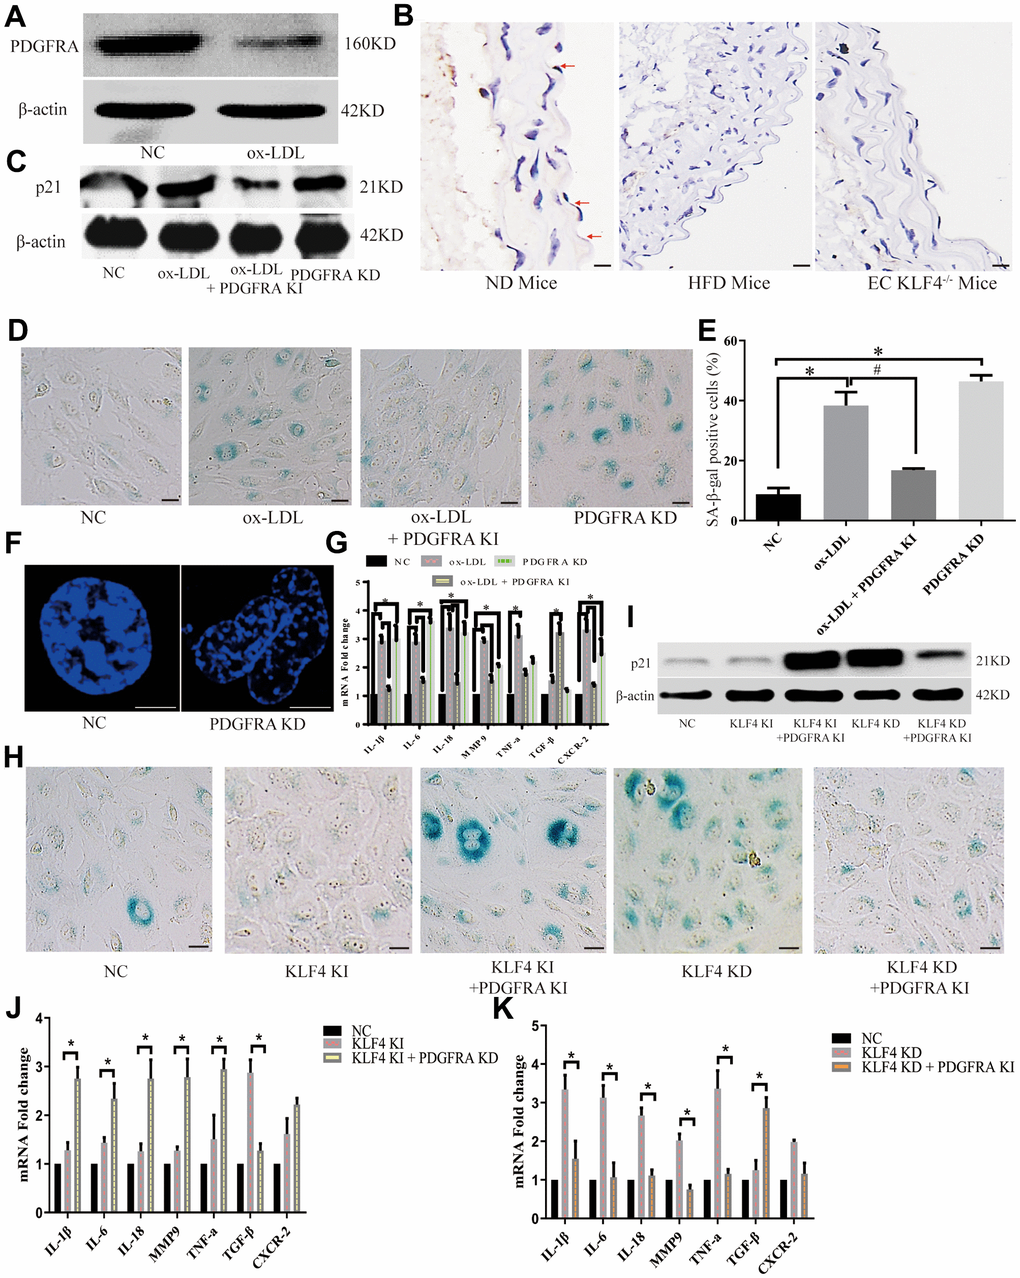 KLF4 inhibited the HUVEC SASP through PDGFRA. (A) Western blotting analysis of PDGFRA protein expression in ox-LDL-treated HUVECs (n=5). (B) Immunohistochemical detection of PDGFRA protein expression in the intima of ND-fed WT mice, HFD-fed WT mice and HFD-fed EC KLF4-/- mice. Scale bar, 200 μm. Representative images (n=5) are shown. Red arrow, PDGFRA-positive endothelial cells. (C) Western blotting analysis of p21 protein expression in ox-LDL-treated HUVECs after altered PDGFRA expression (n=5). (D) Histochemical detection of SA-β-gal-positive ECs in ox-LDL-treated HUVECs after altered PDGFRA expression. Scale bar, 50 μm. Representative images (n=5) are shown. Blue, SA-β-gal-positive ECs. (E) SA-β-gal staining positive cells were counted and presented as percentage of total cells. (F) Immunofluorescence detection of typical SAHF formation in cultured HUVECs (n=5). Scale bar, 20 μm. (G) qPCR analysis of the mRNA levels of cytokines in ox-LDL-treated HUVECs after regulating PDGFRA (n=5). *P H) Histochemical detection of SA-β-gal-positive ECs in KLF4-treated HUVECs after regulating PDGFRA. Scale bar, 50 μm. Representative images (n=5) are shown. Blue, SA-β-gal-positive ECs. (I) Western blotting analysis of p21 protein expression in KLF4-treated HUVECs after regulating PDGFRA (n=5). (J) qPCR analysis of the mRNA levels of cytokines in KLF4-knock-in HUVECs after PDGFRA knockdown (n=5). *P K) qPCR analysis of cytokine mRNA levels in KLF4-knockdown HUVECs after PDGFRA knock-in (n=5). *P 